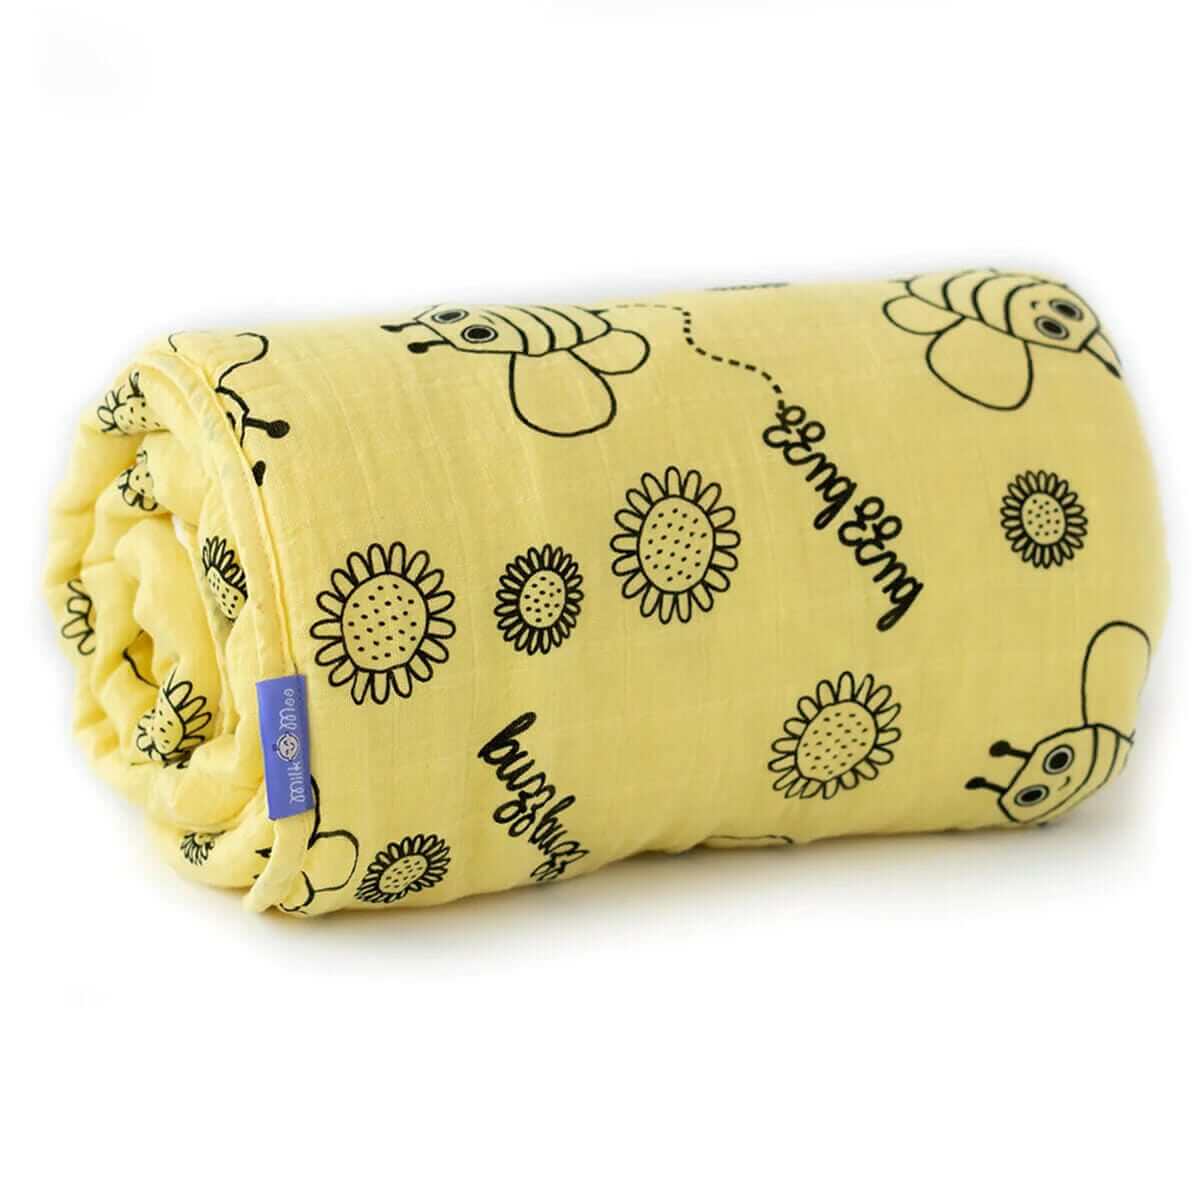 Soft Buzzy Bee Baby Muslin Fiber Filled Blanket by Milk&Moo: An Ultra-Gentle and Cozy Choice